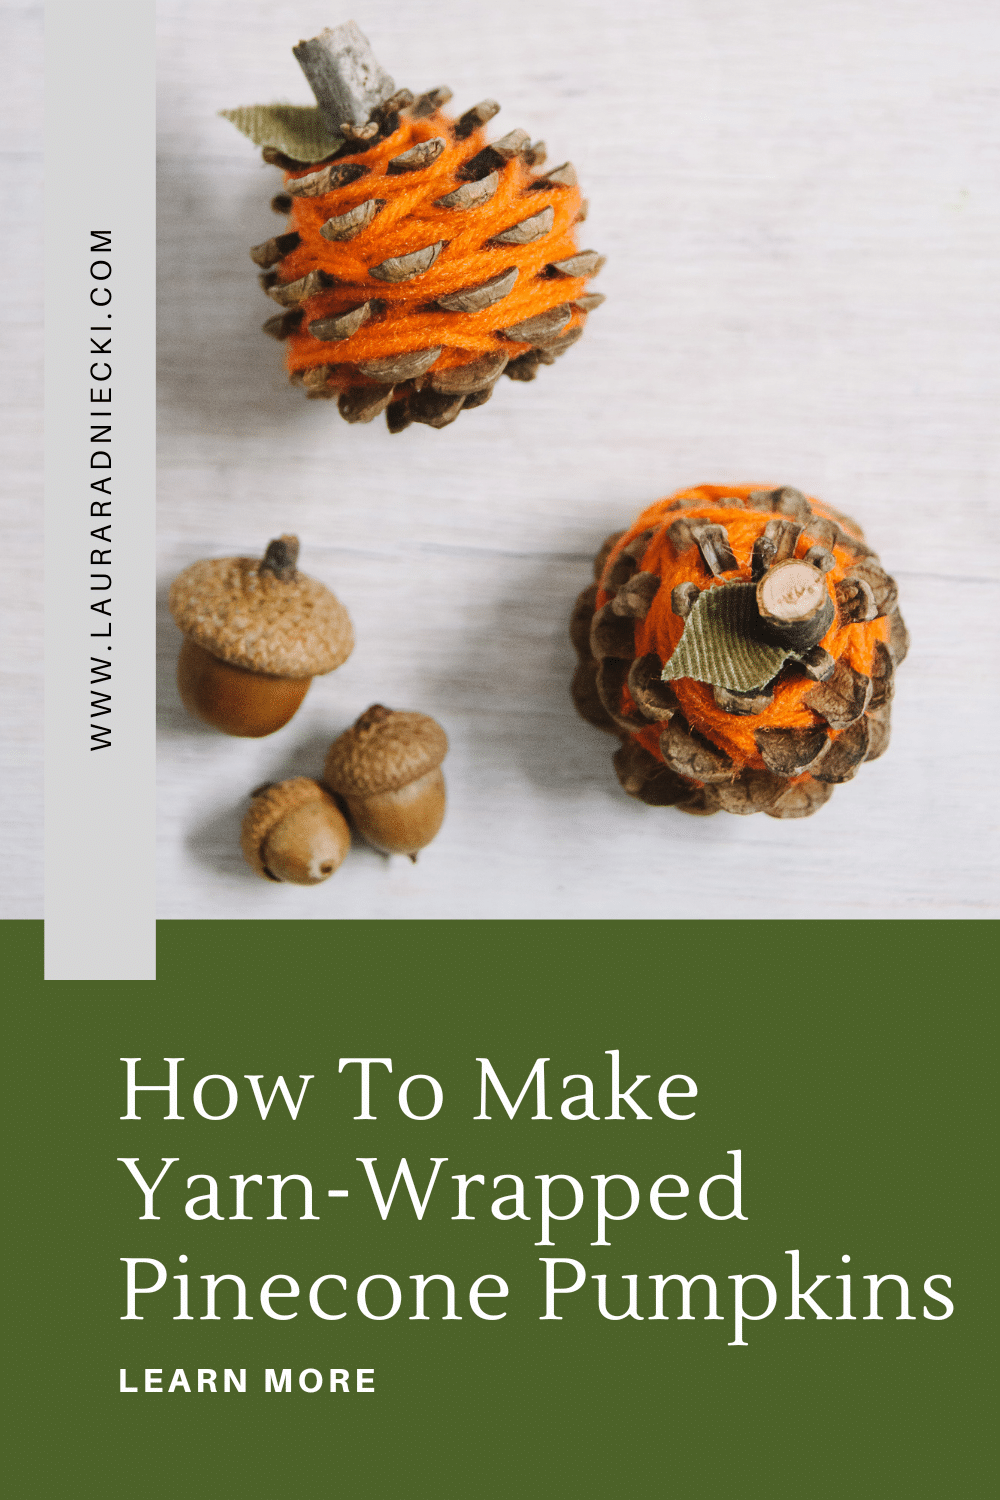 how to make yarn-wrapped pinecone pumpkins for fall decor